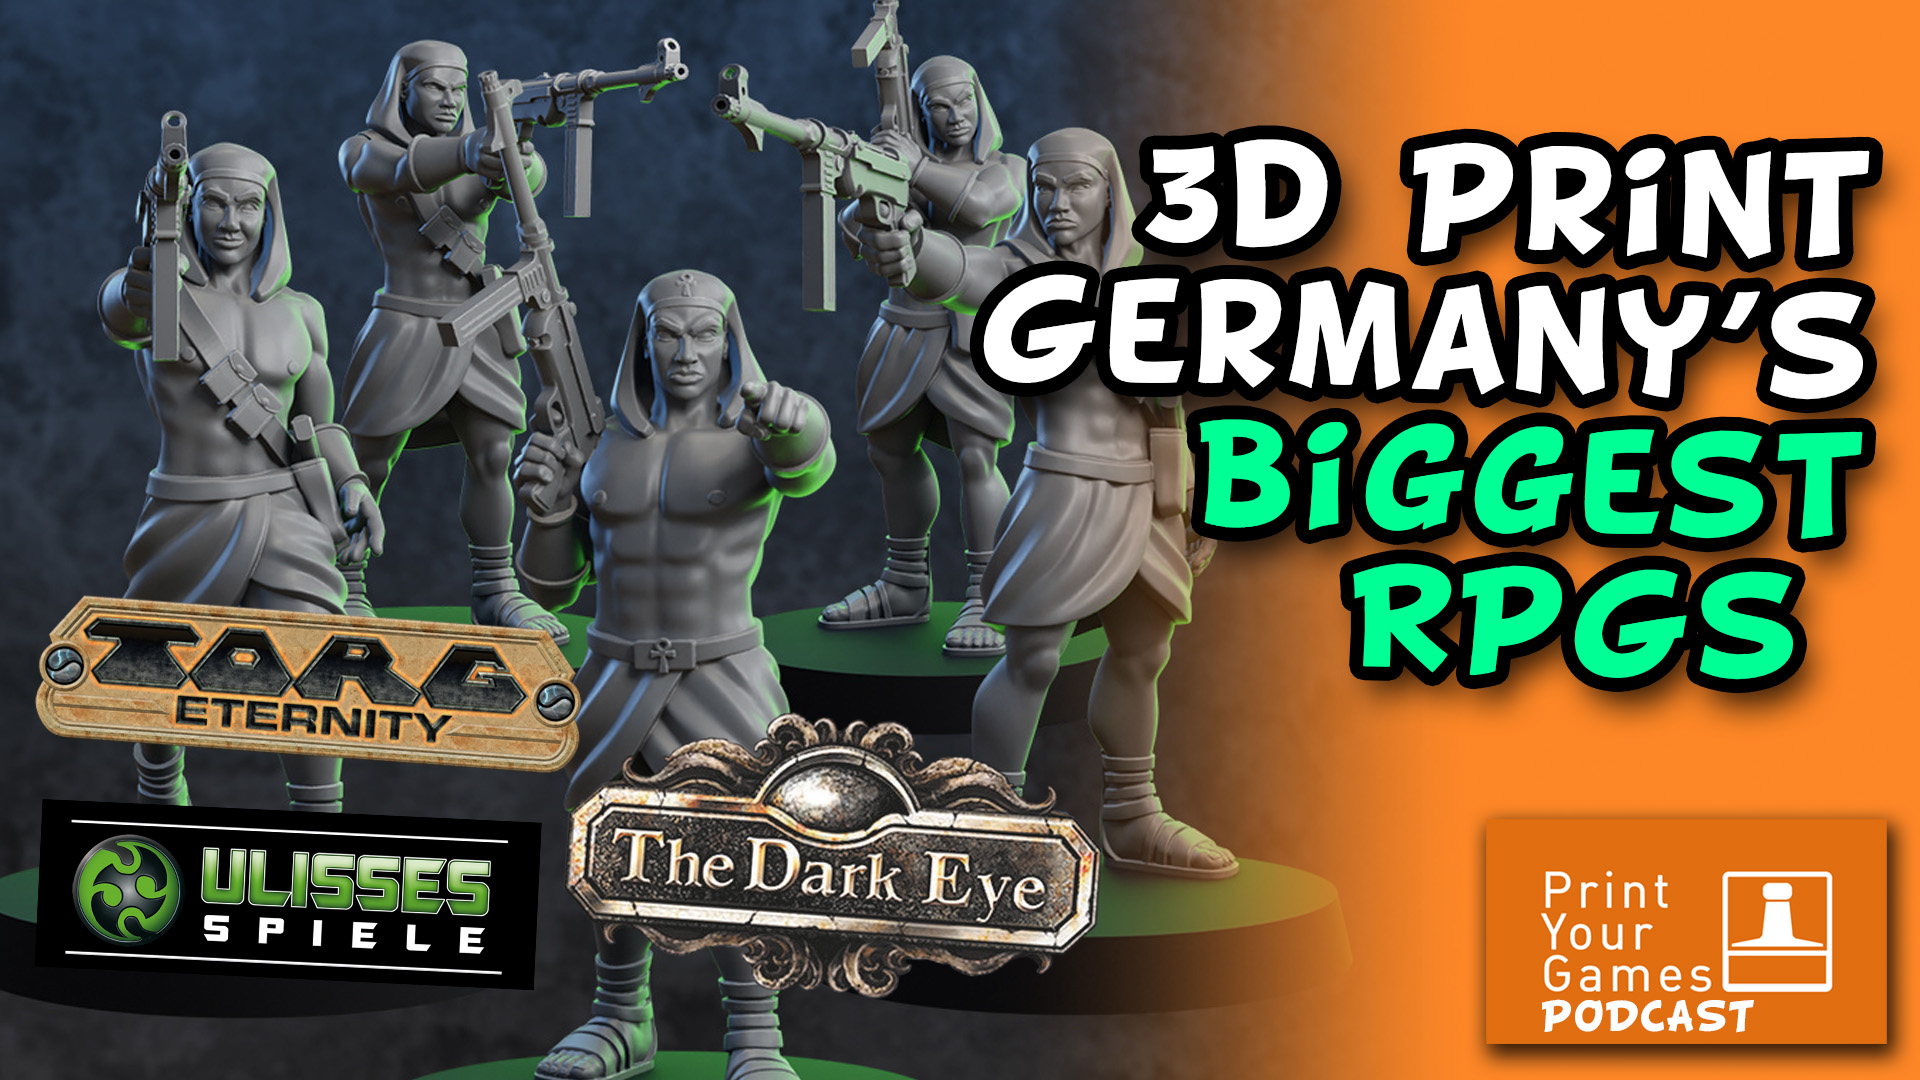 3d Print Germany's Biggest RPGS - Print Your Games Podcast